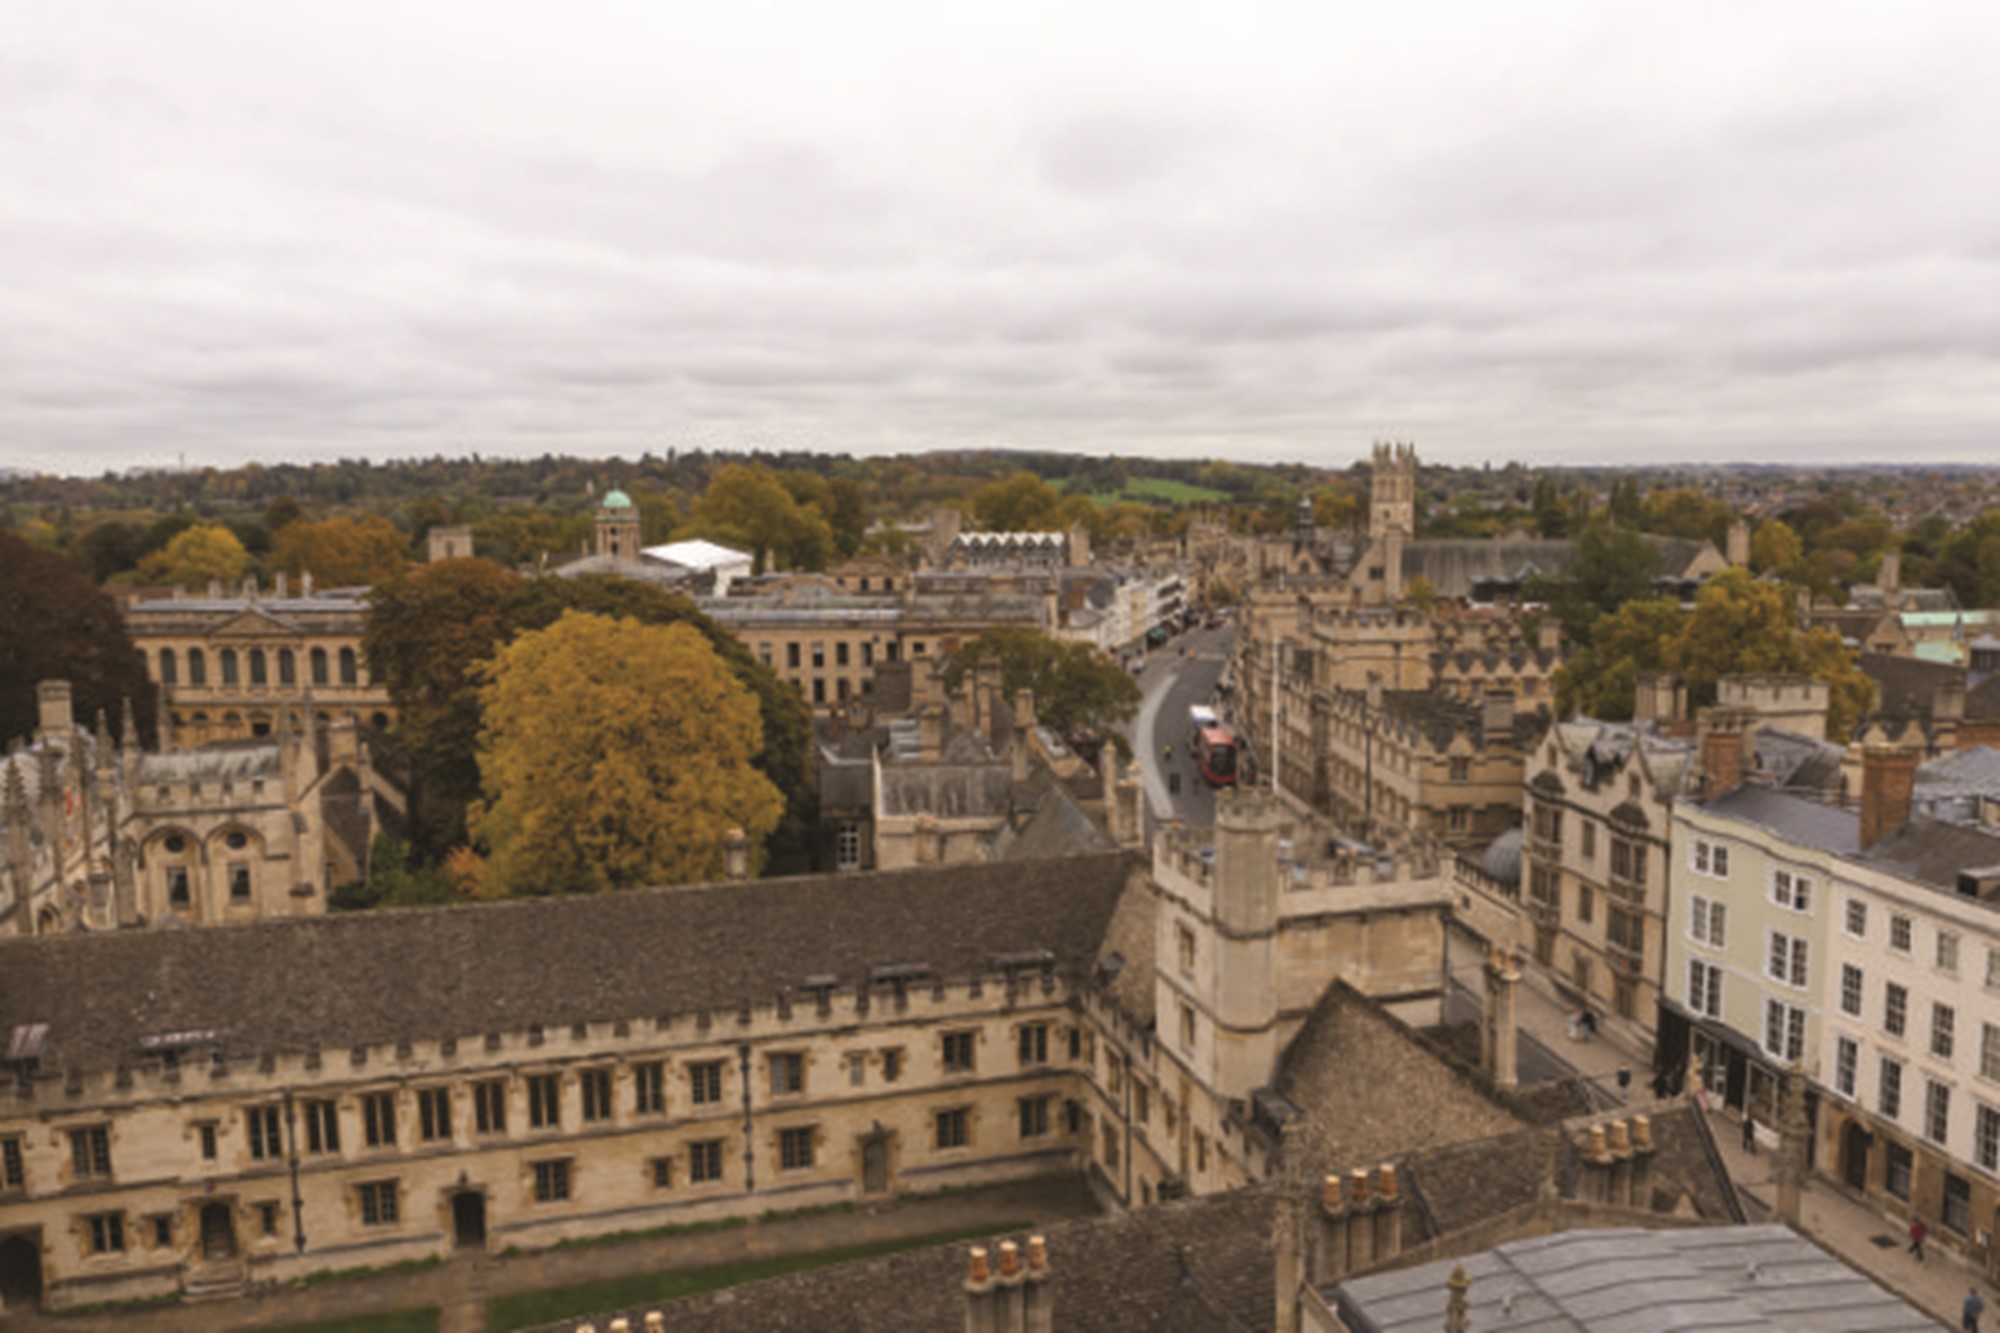 University of Oxford contract award for full water hygiene services Oxford/University of Oxford